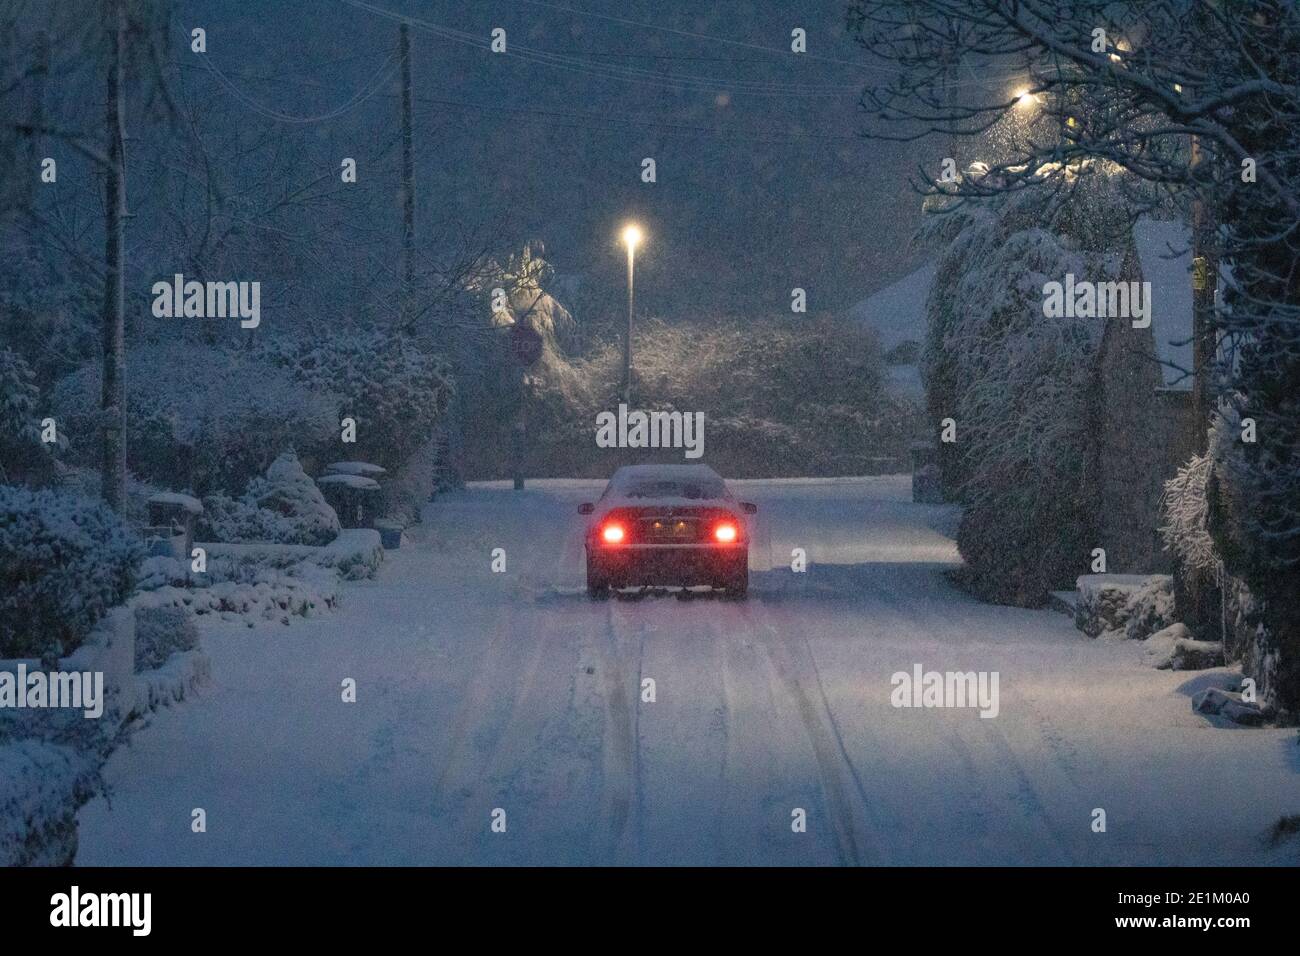 Flintshire, North Wales, UK 8th January 2021, UK Weather:  Freezing overnight temperatures have left many waking to well below zero temperatures this morning with heavy snowfall in the area too causing treacherous driving conditions.  A motorist tackling the difficult driving conditions in blizzard conditions in the village of Lixwm, North Wales © DGDImages/Alamy Live News Stock Photo